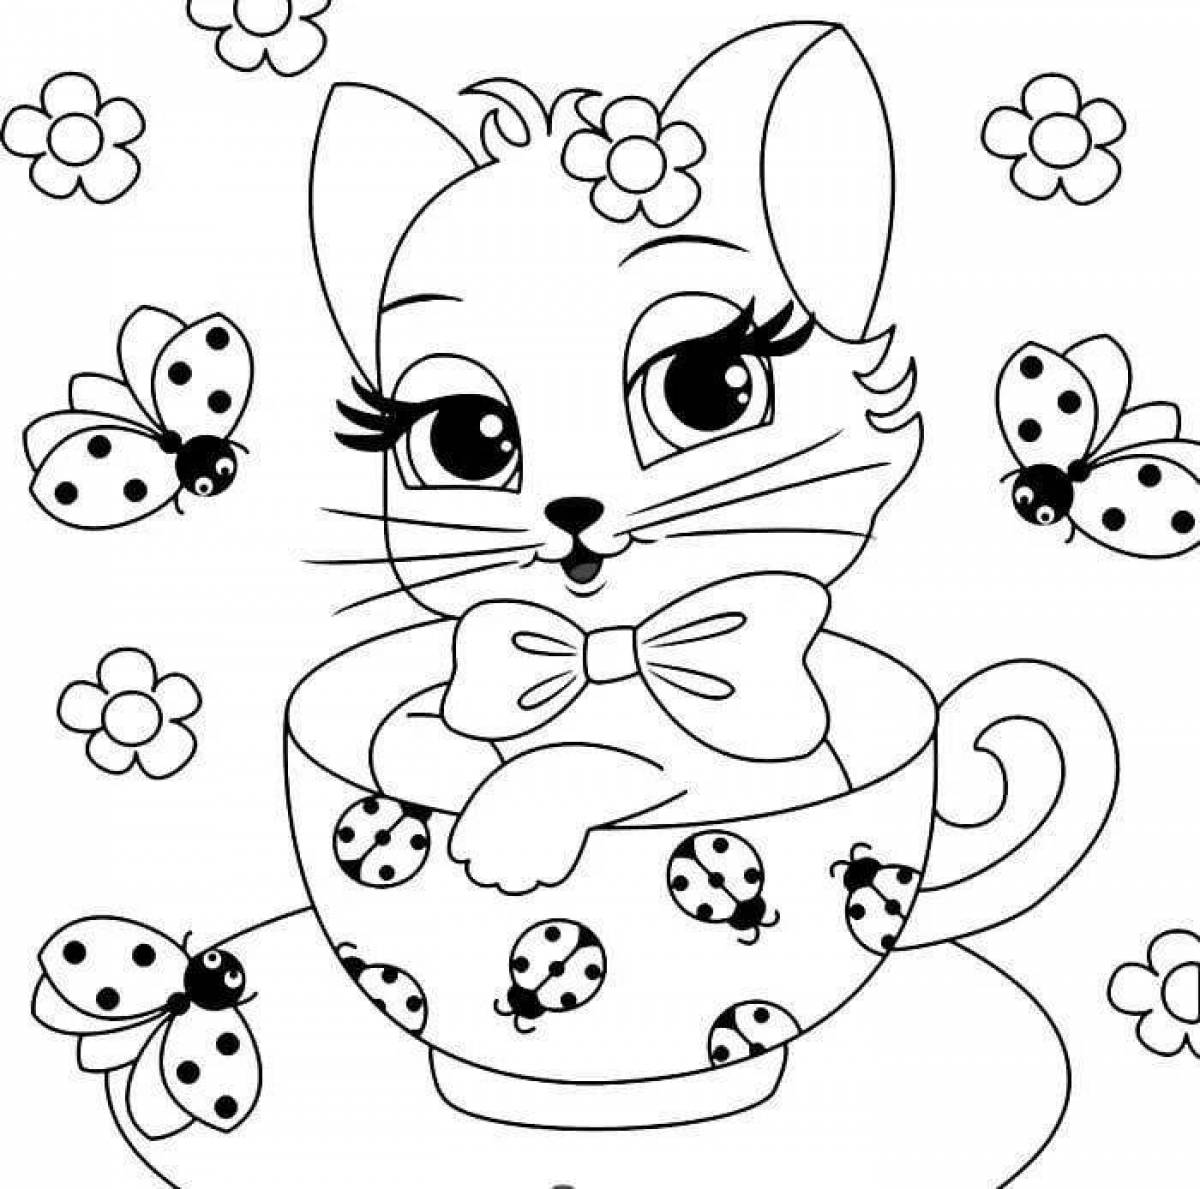 Fun coloring pages for kids 6-7 years old cats